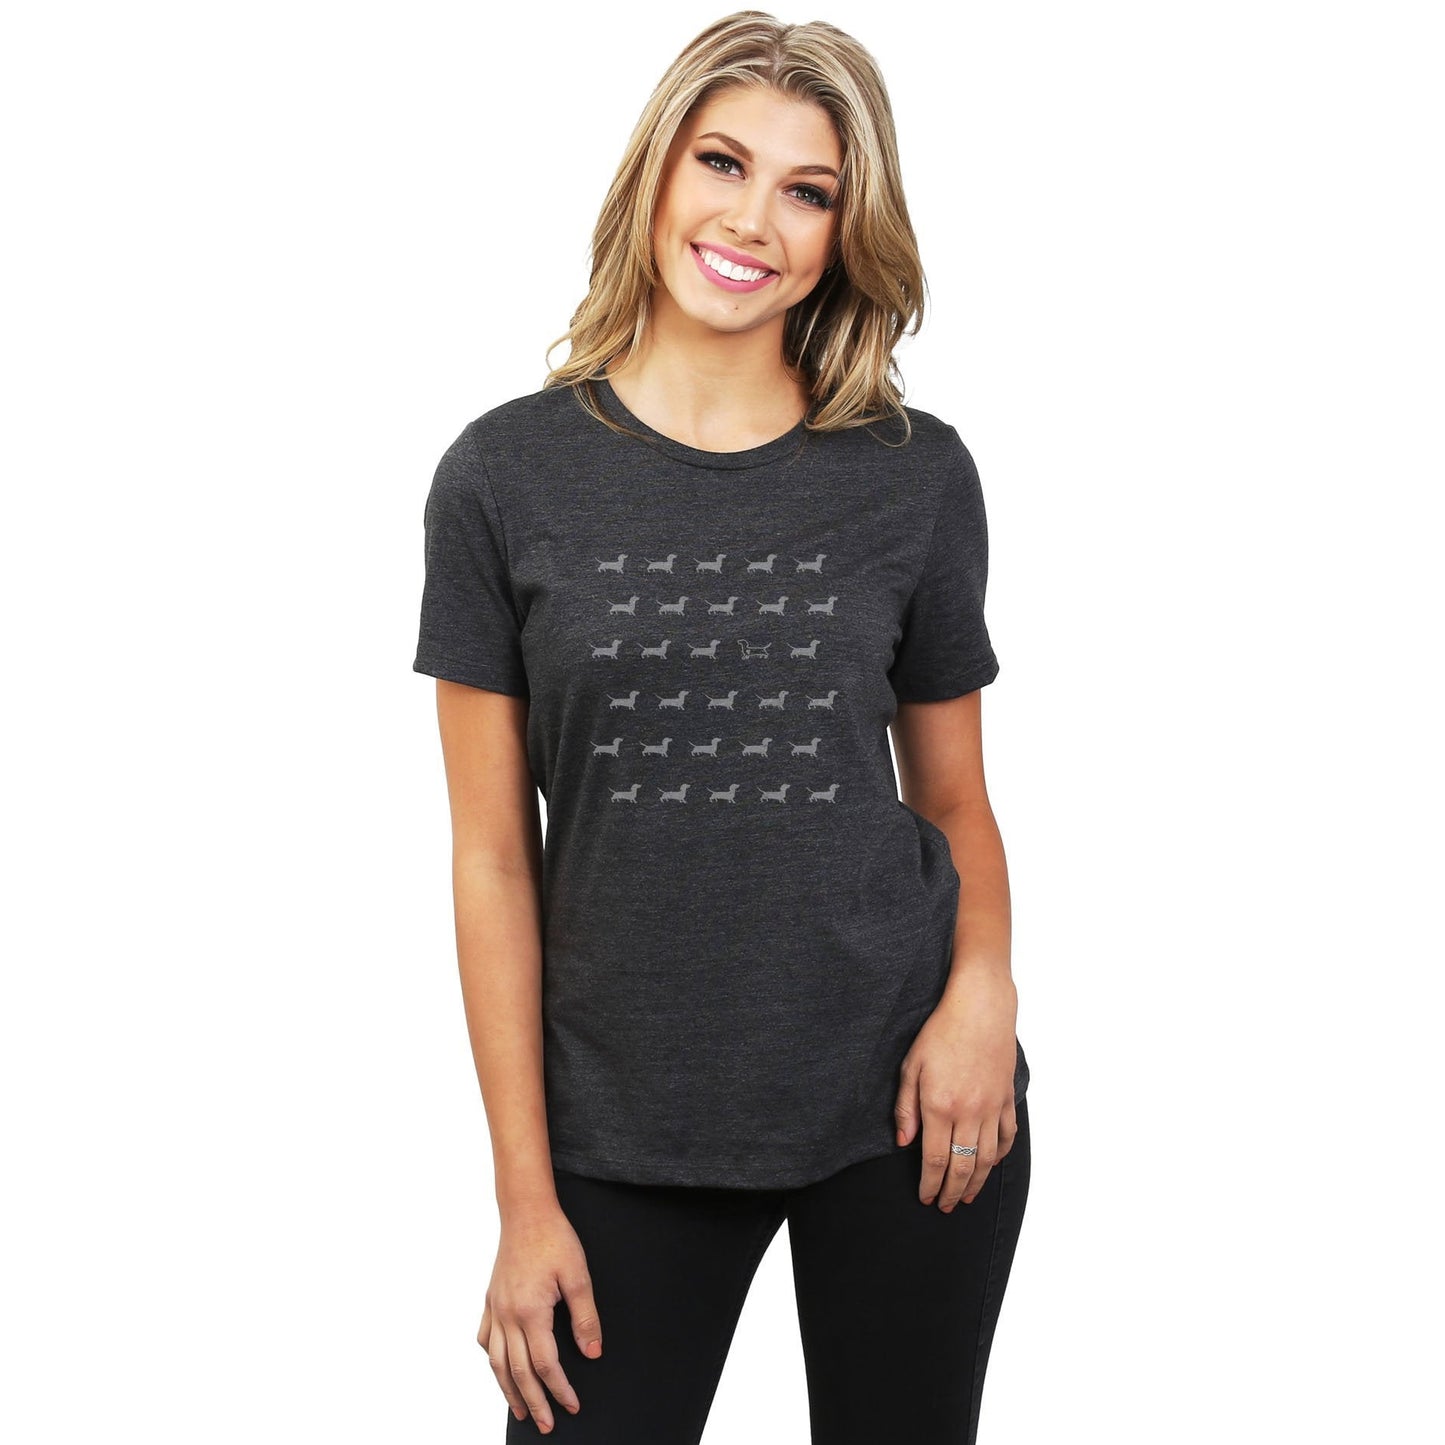 Dachshund Stand Out Women's Relaxed Crewneck T-Shirt Top Tee Charcoal Model
